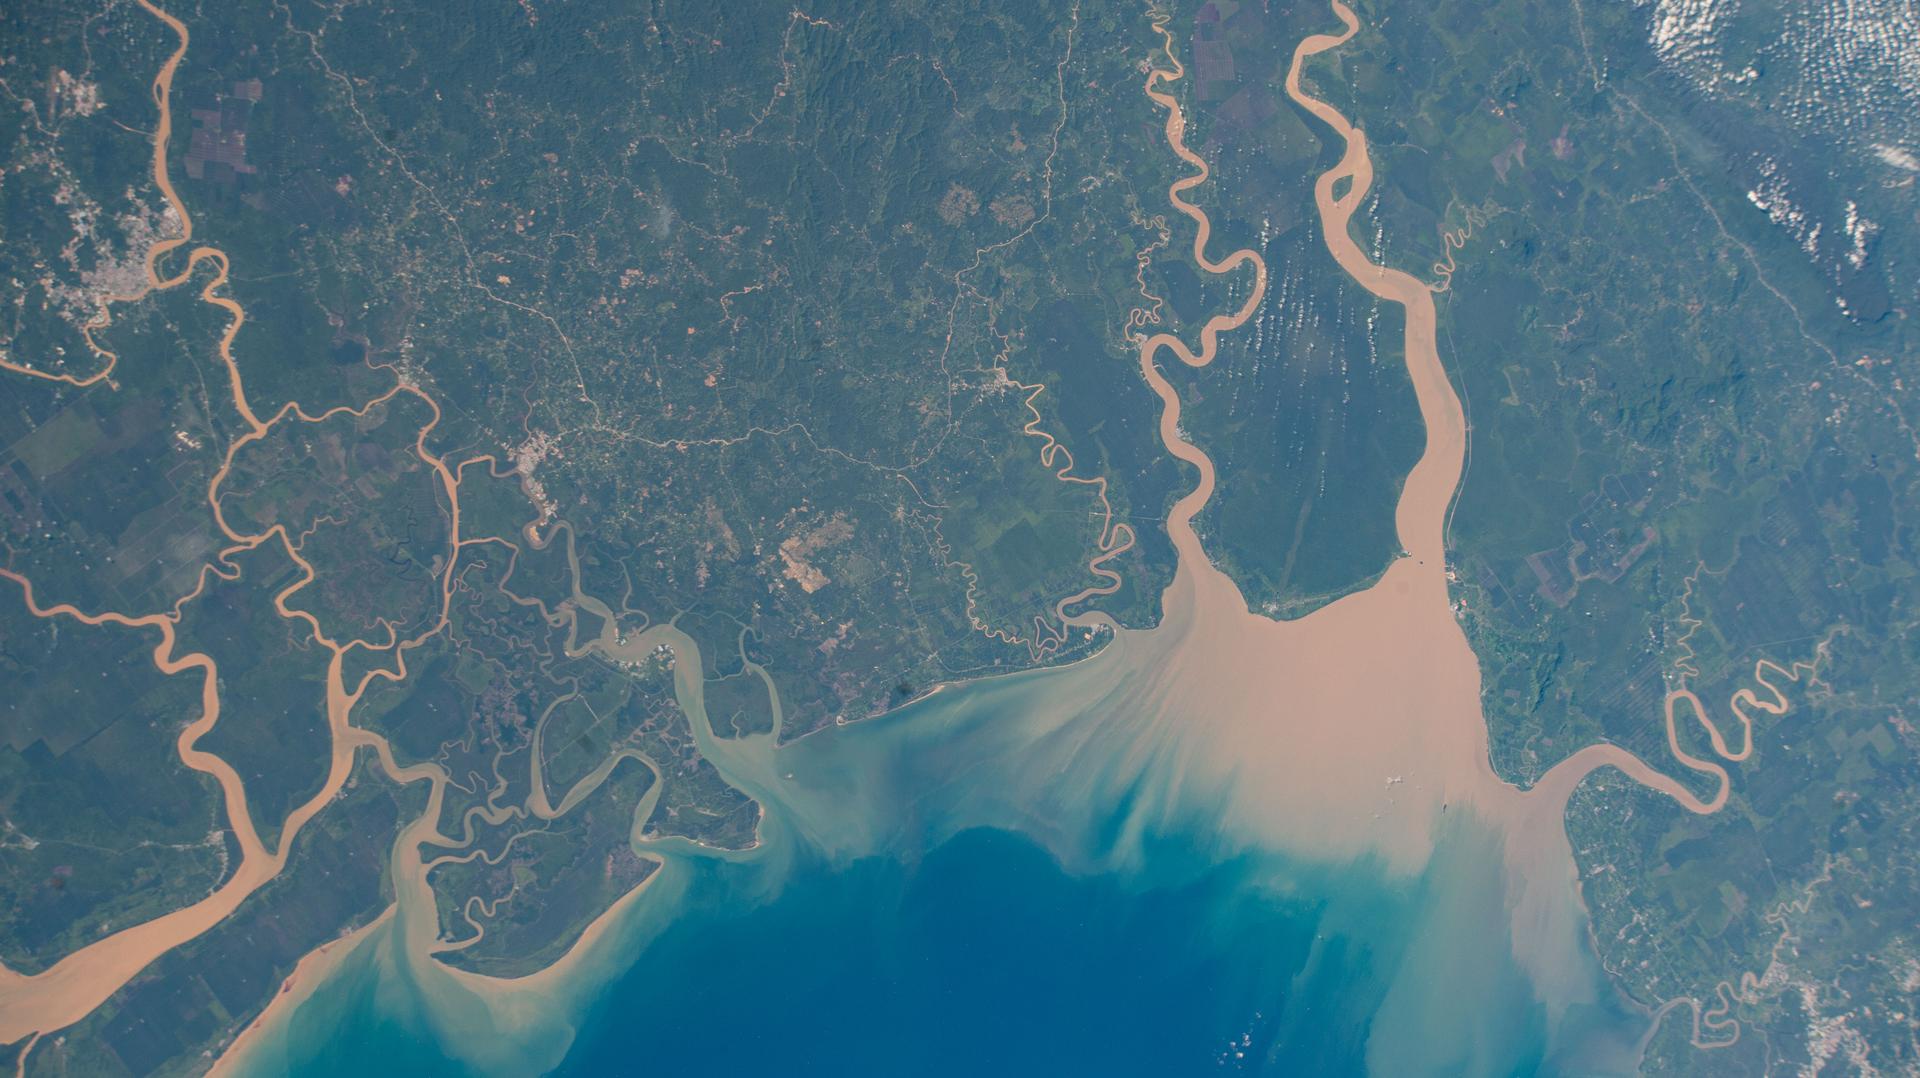 image of rivers flowing out to a coast around a peninsula